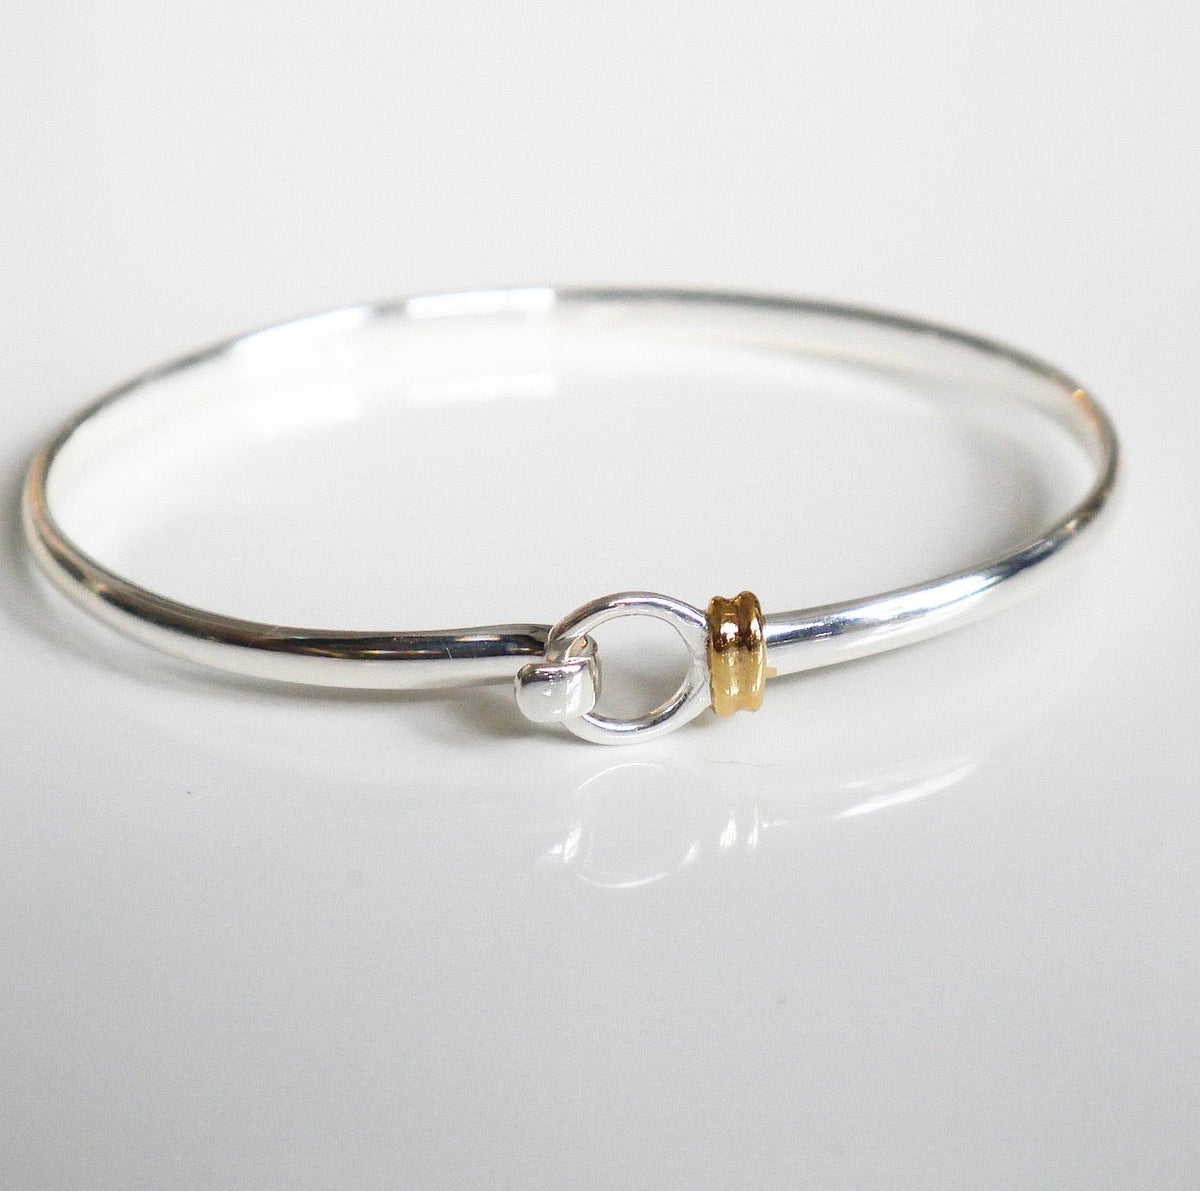 cuff bracelet with hook in .925 sterling silver bu kesleyboutique, girlwith3jobs, silver jewelry in Miami , bangle bracelet with gold and silver 